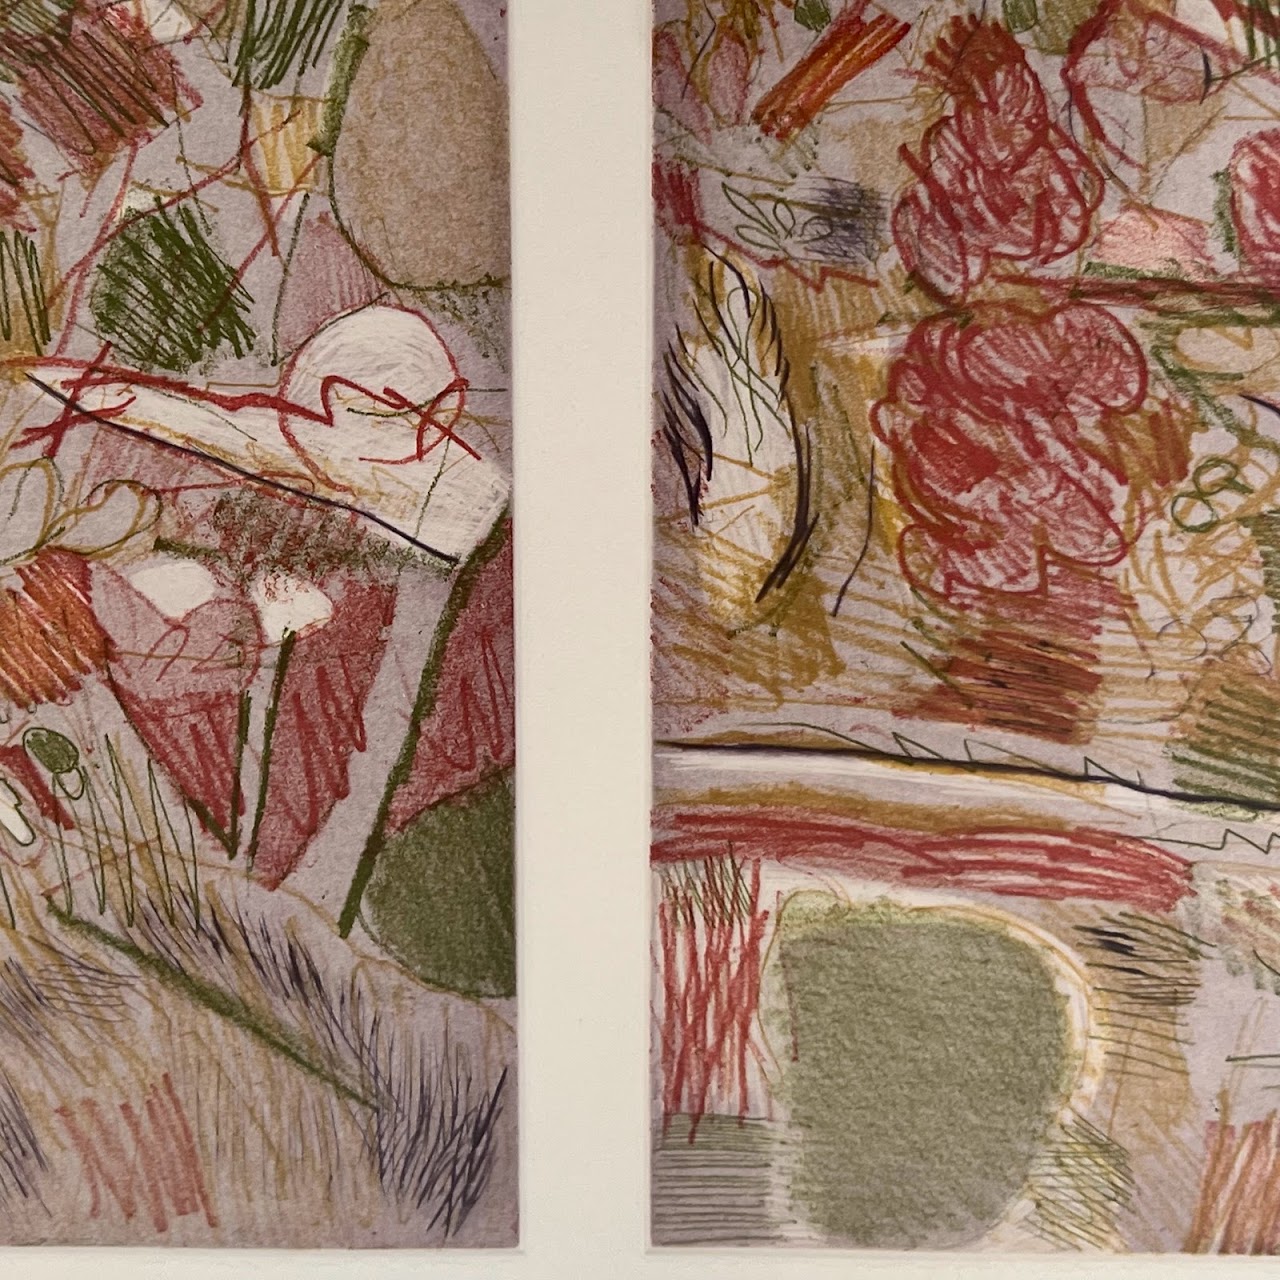 Ruth Fine 'Landscape Diptych II' Signed Etching & Aquatint